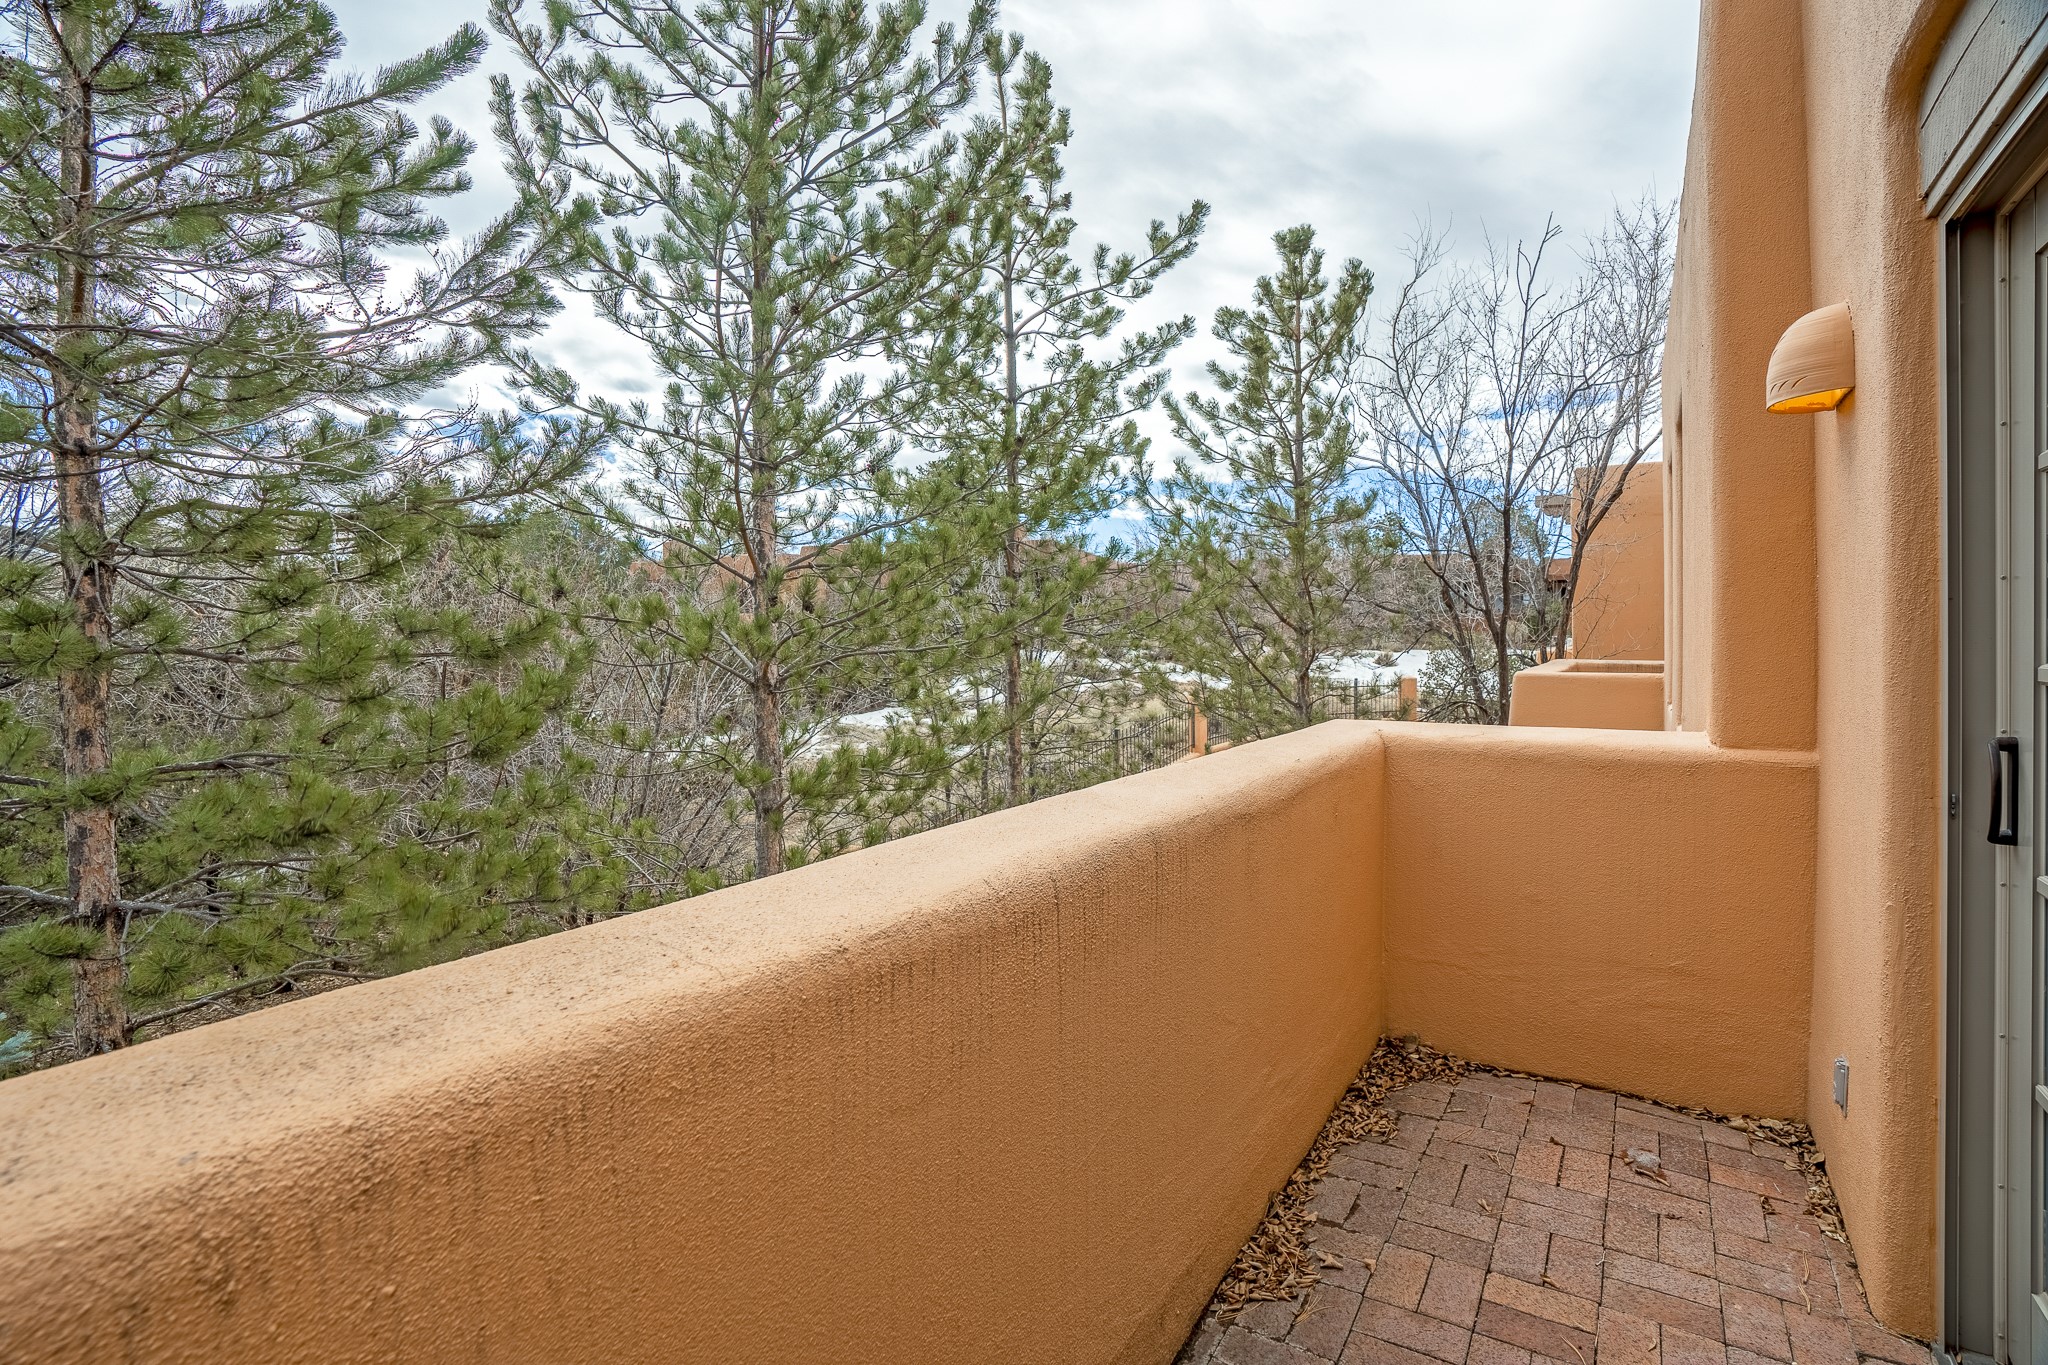 3101 Old Pecos Trail 245, Santa Fe, New Mexico 87505, 2 Bedrooms Bedrooms, ,2 BathroomsBathrooms,Residential,For Sale,3101 Old Pecos Trail 245,202334859